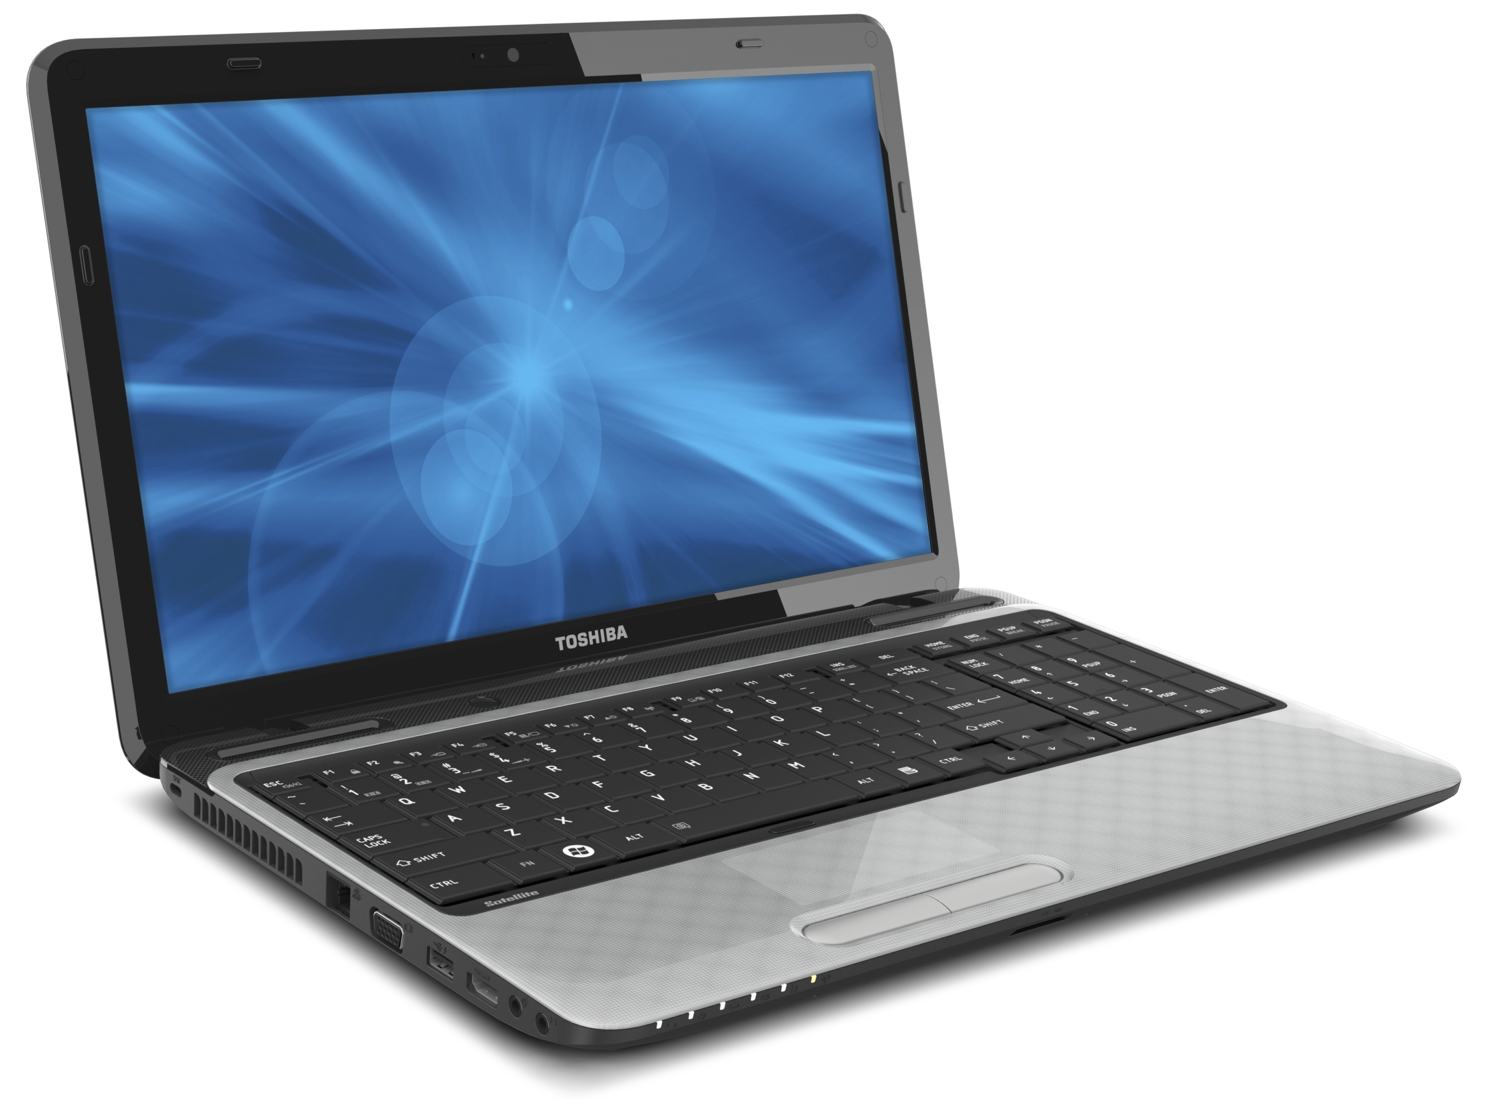 http://thetechjournal.com/wp-content/uploads/images/1111/1321885178-toshiba-satellite-l755s5349-156inch-led-laptop--1.jpg